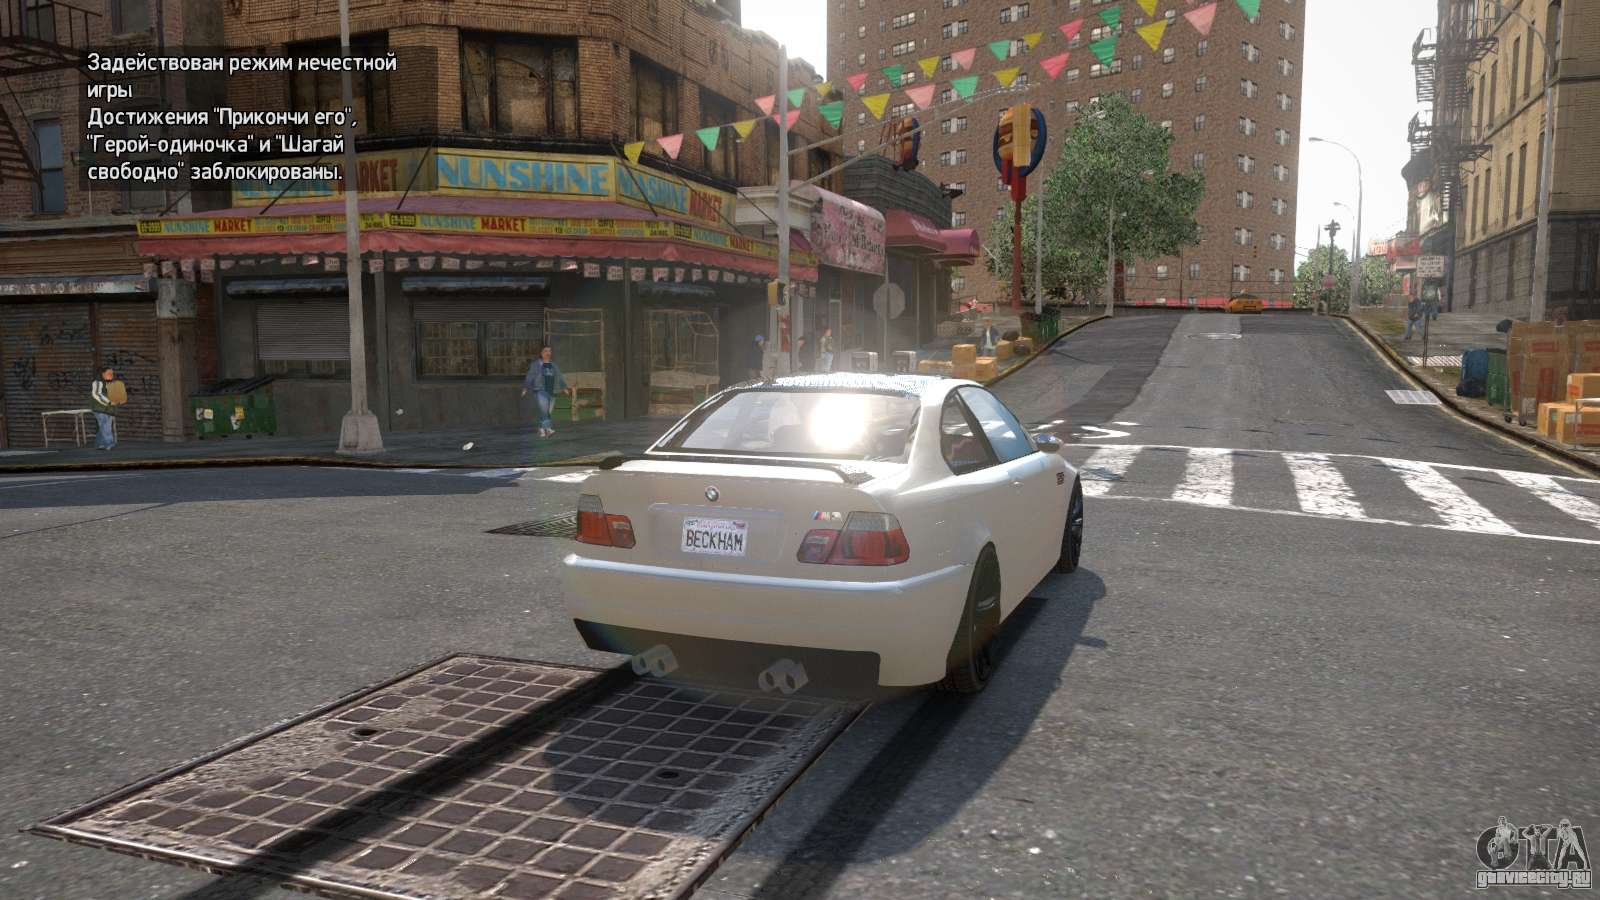 difference gta 4 1.0.7.0 and 1.0.4.0